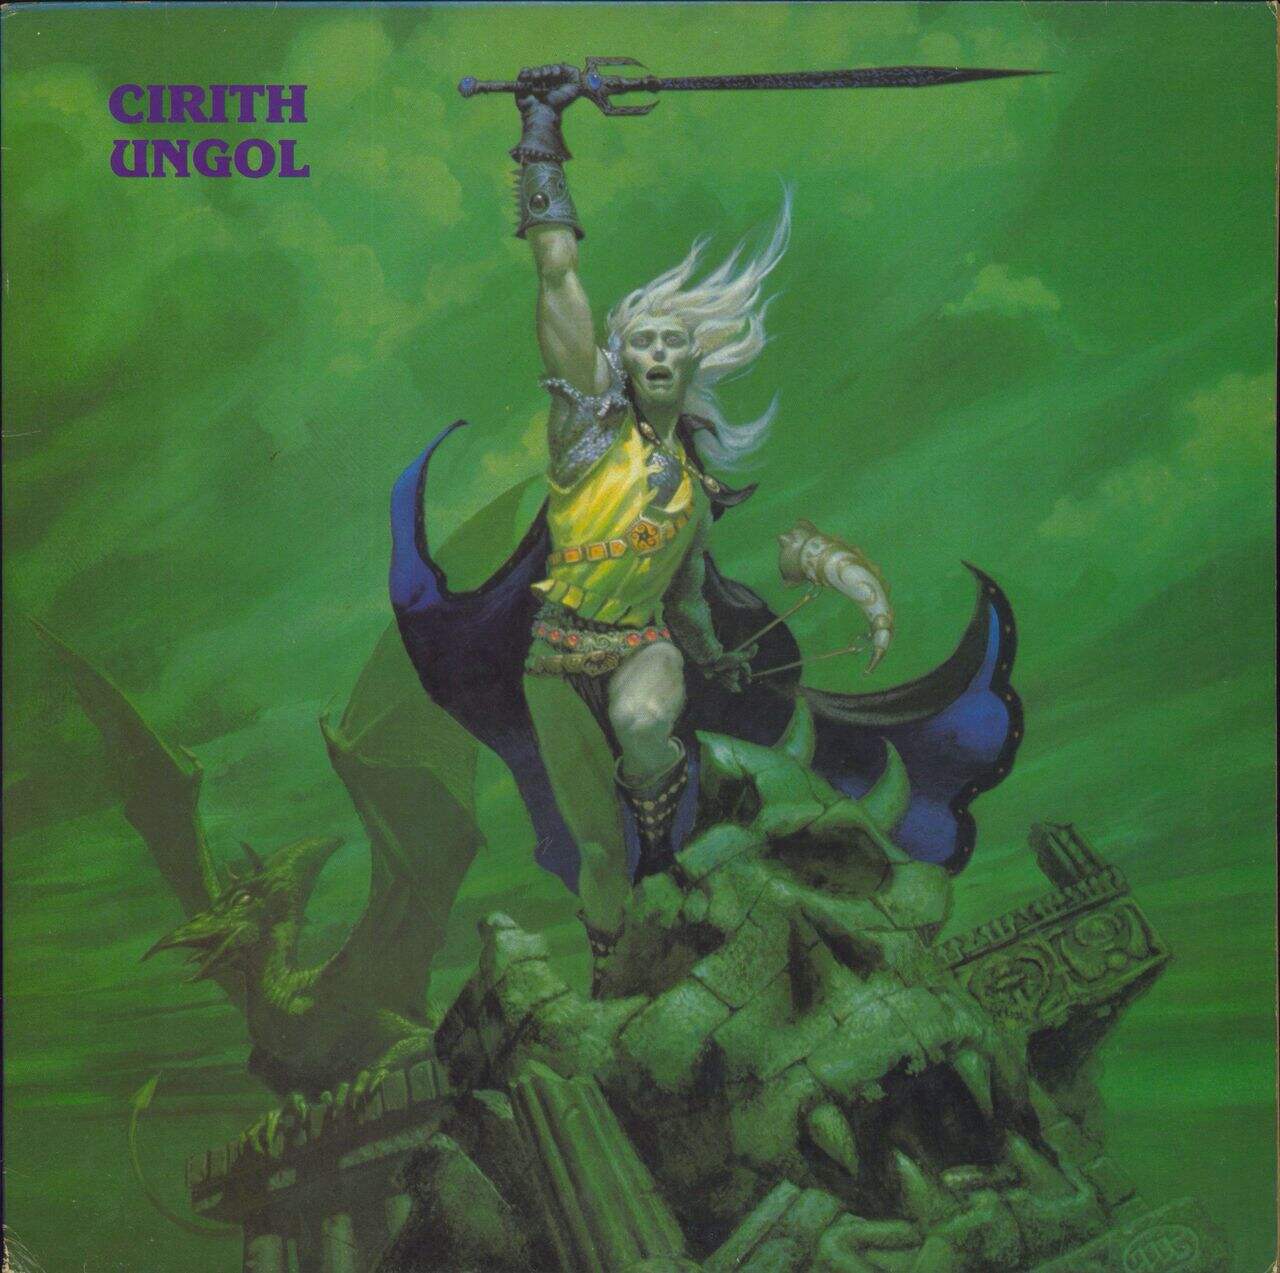 Cirith Ungol Frost And Fire US Vinyl LP